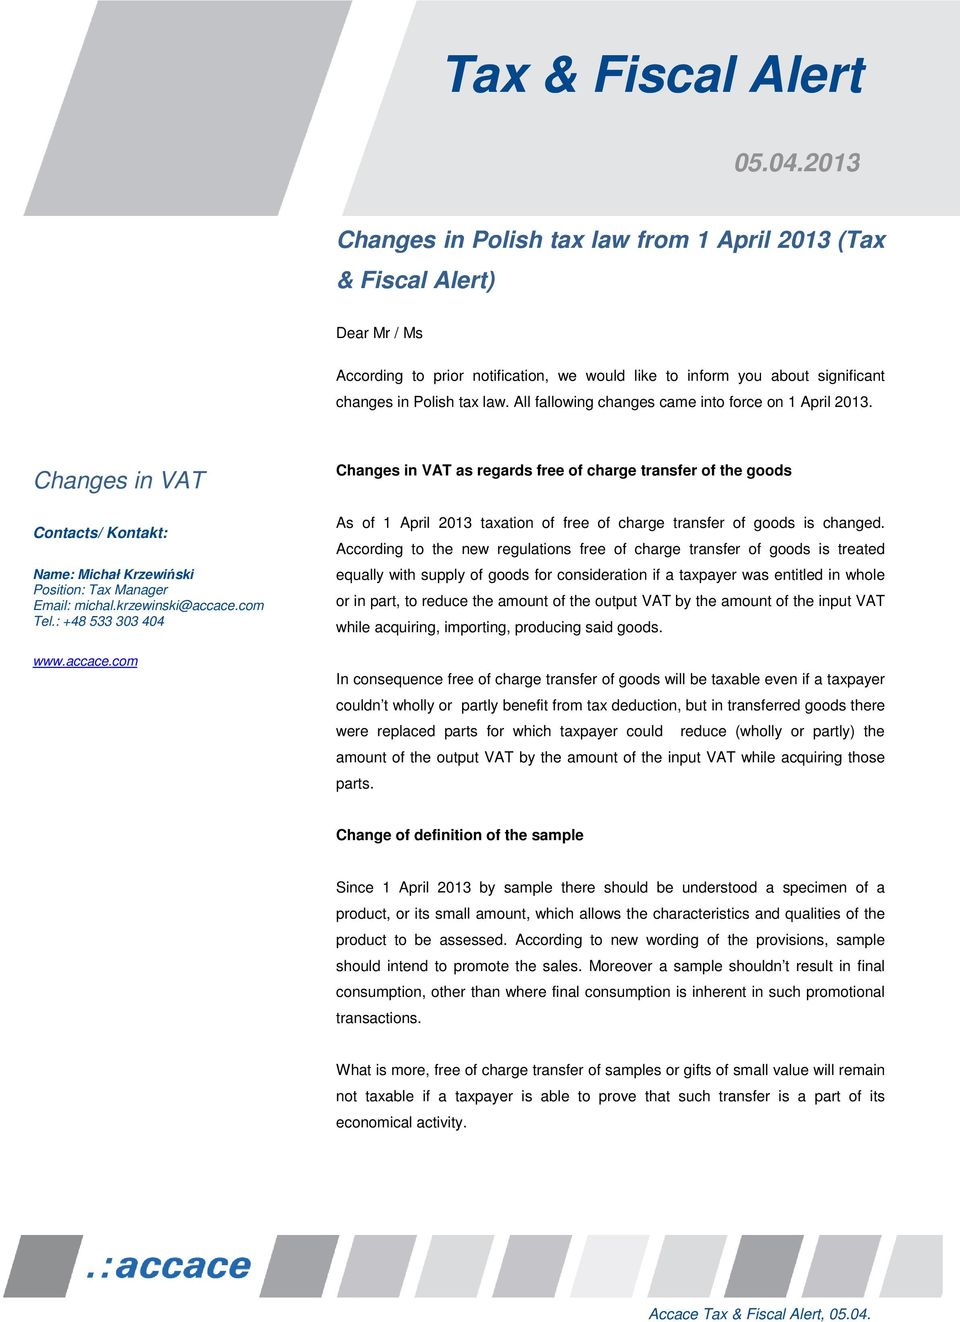 All fallowing changes came into force on 1 April 2013.